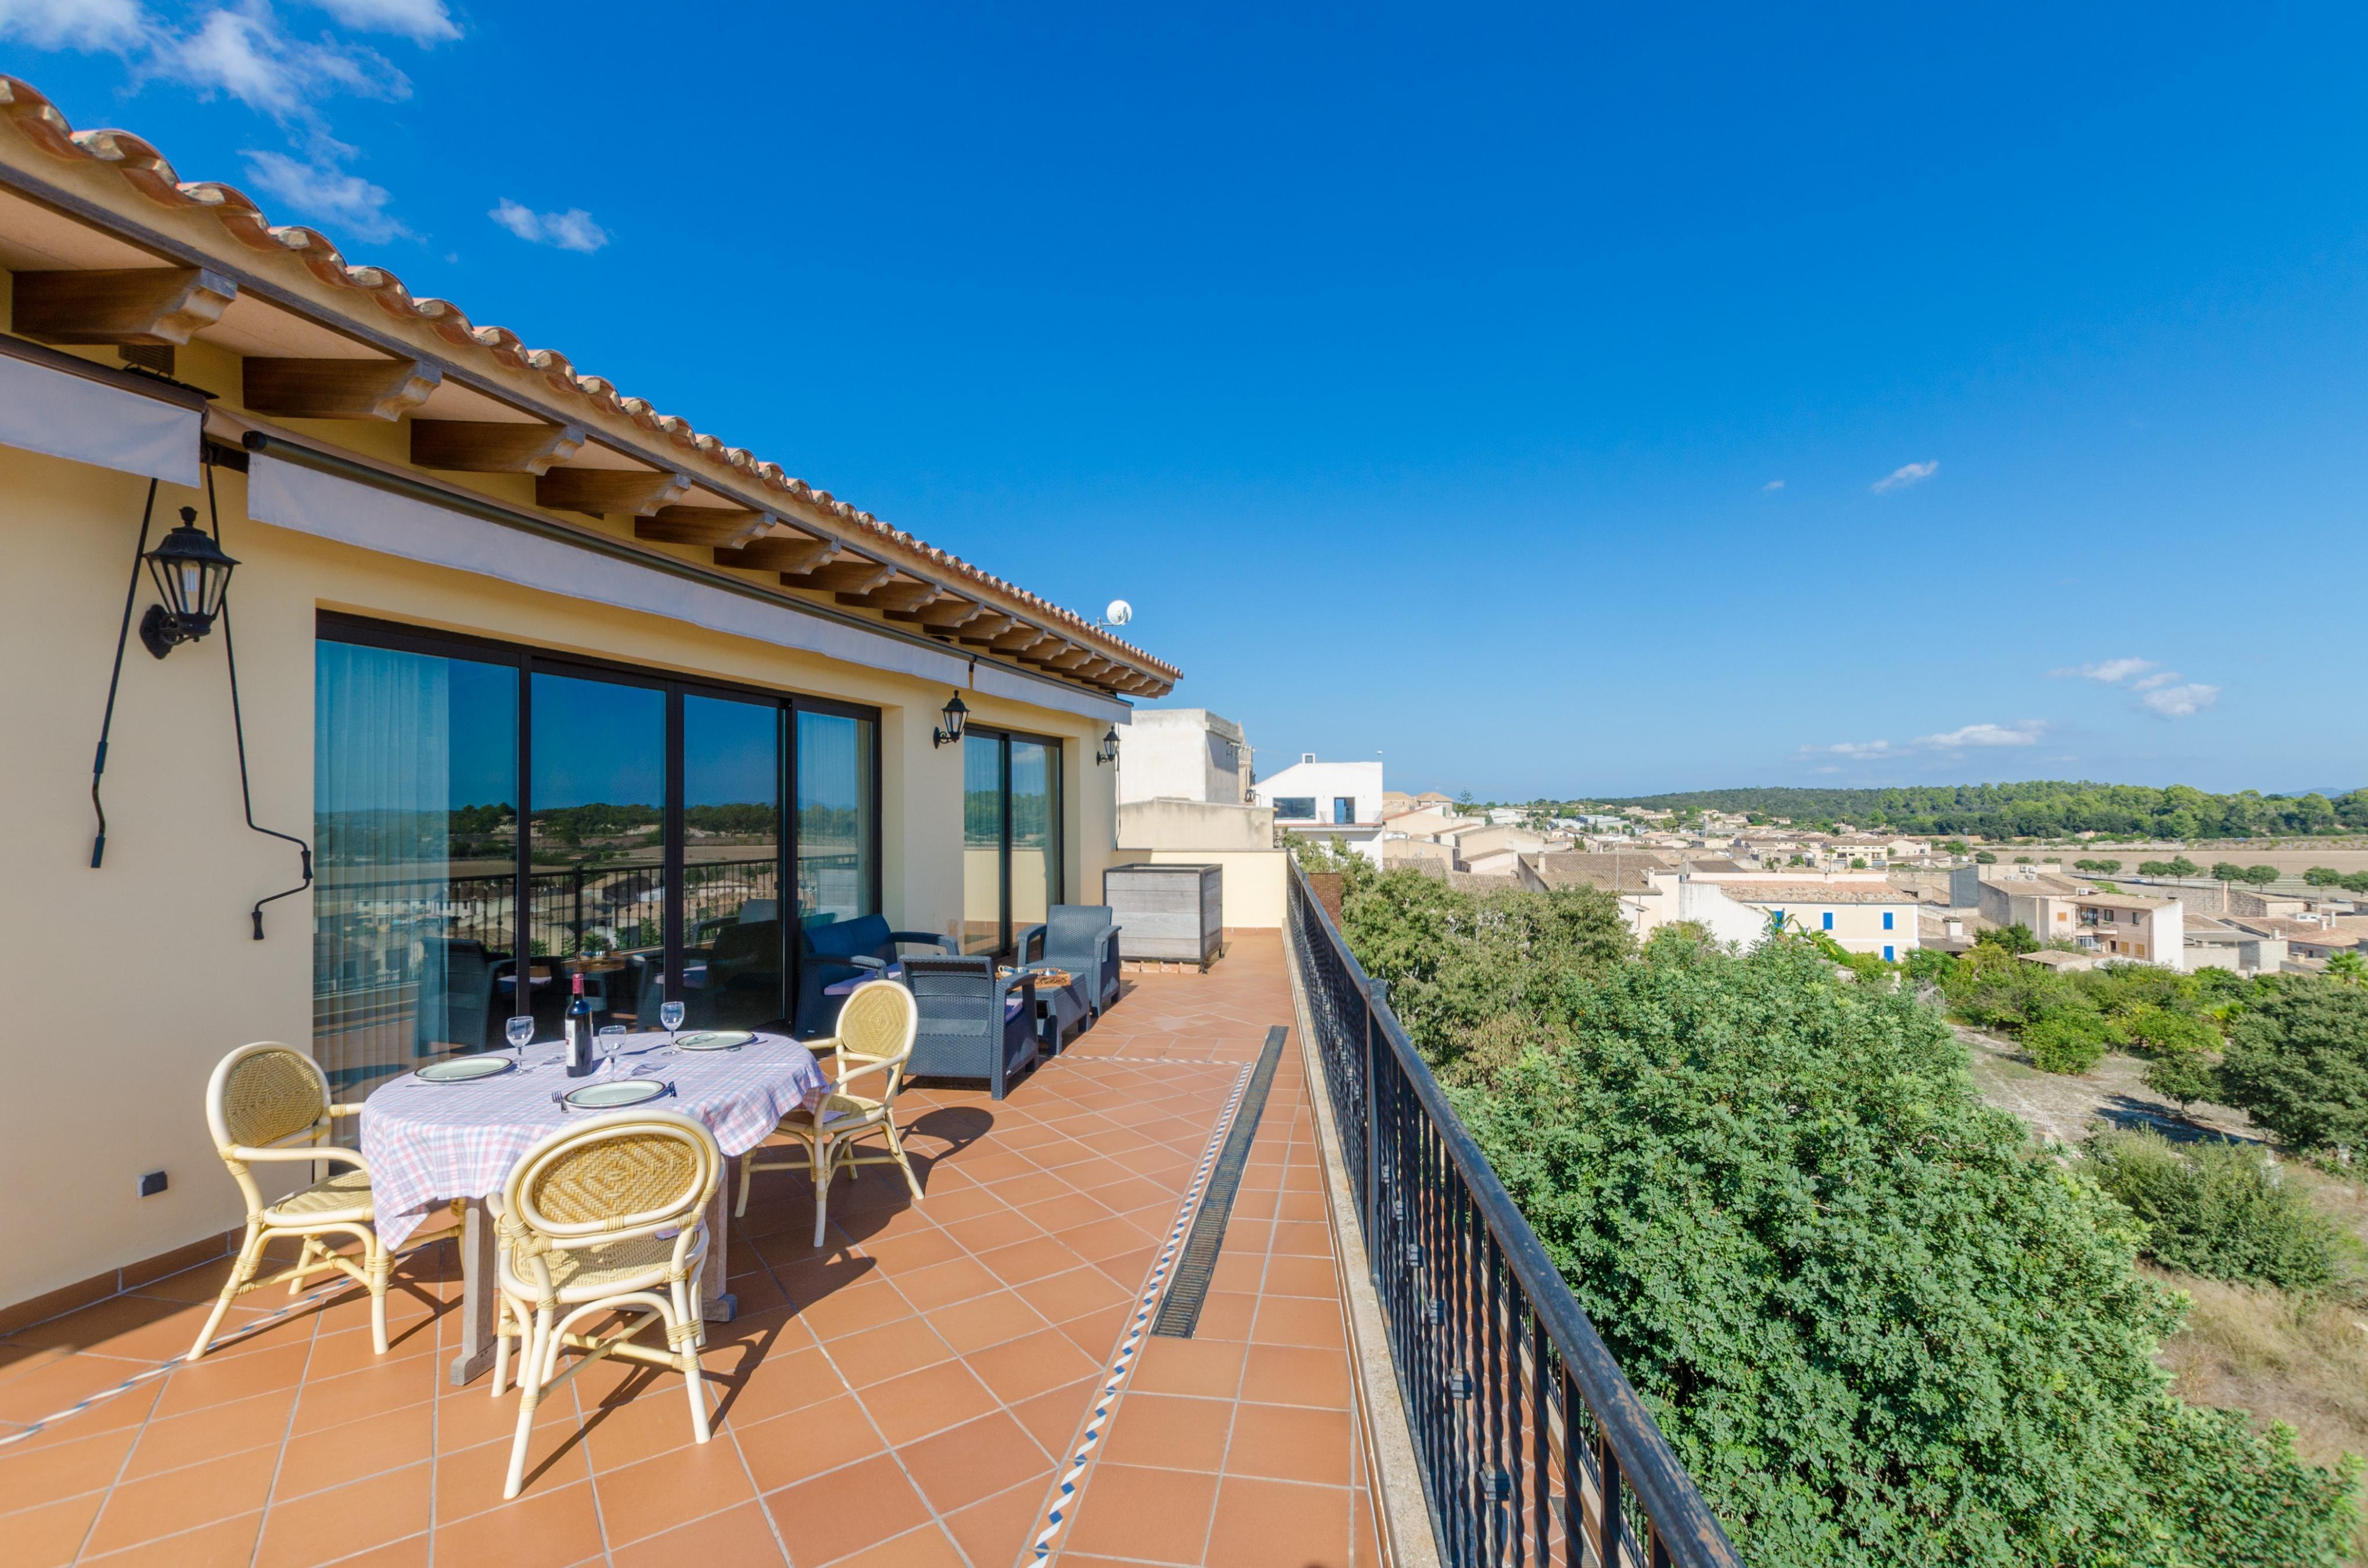 Property Image 1 - CAN NADAL - ADULTS ONLY - Beautiful townhouse with great views. Free WiFi.